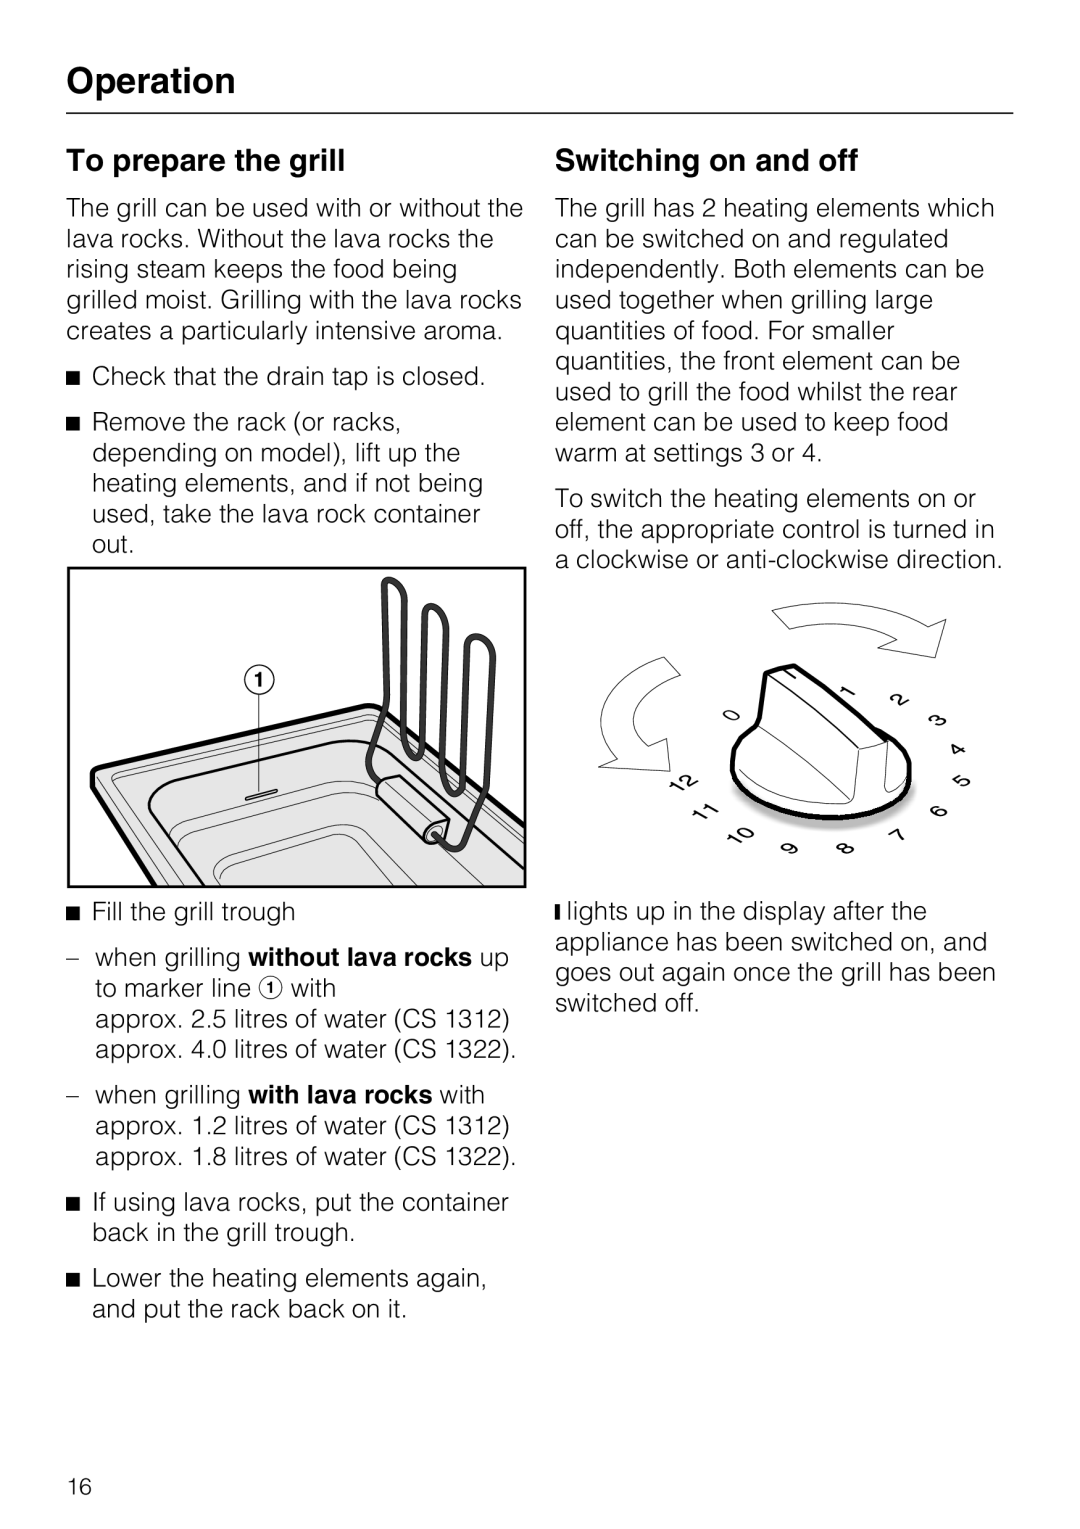 Miele CS1322, CS1312 installation instructions To prepare the grill, Switching on and off, Operation 